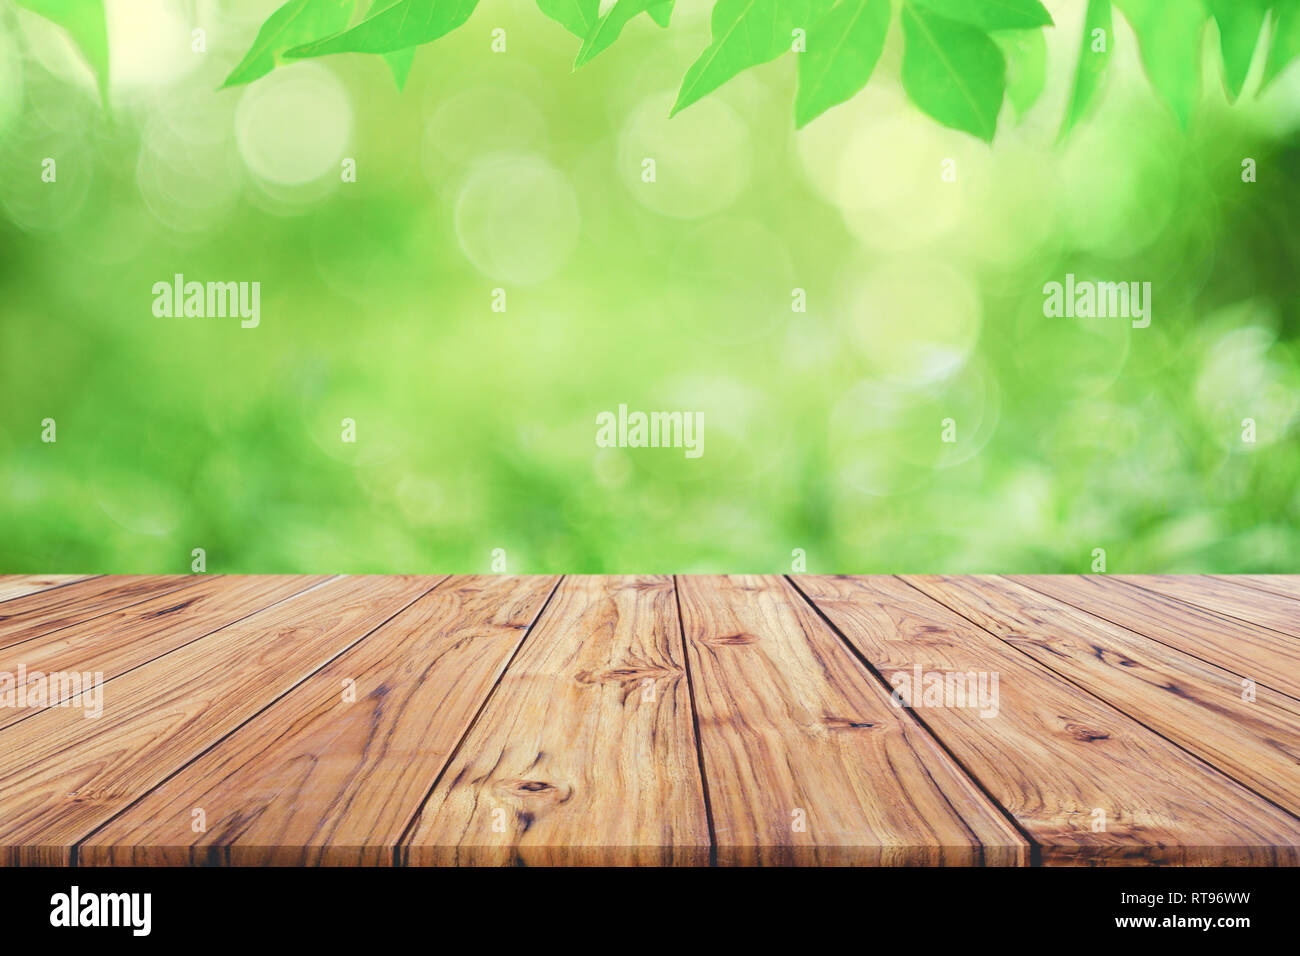 Empty Wooden Table Top Blurred High Resolution Stock Photography And Images Alamy